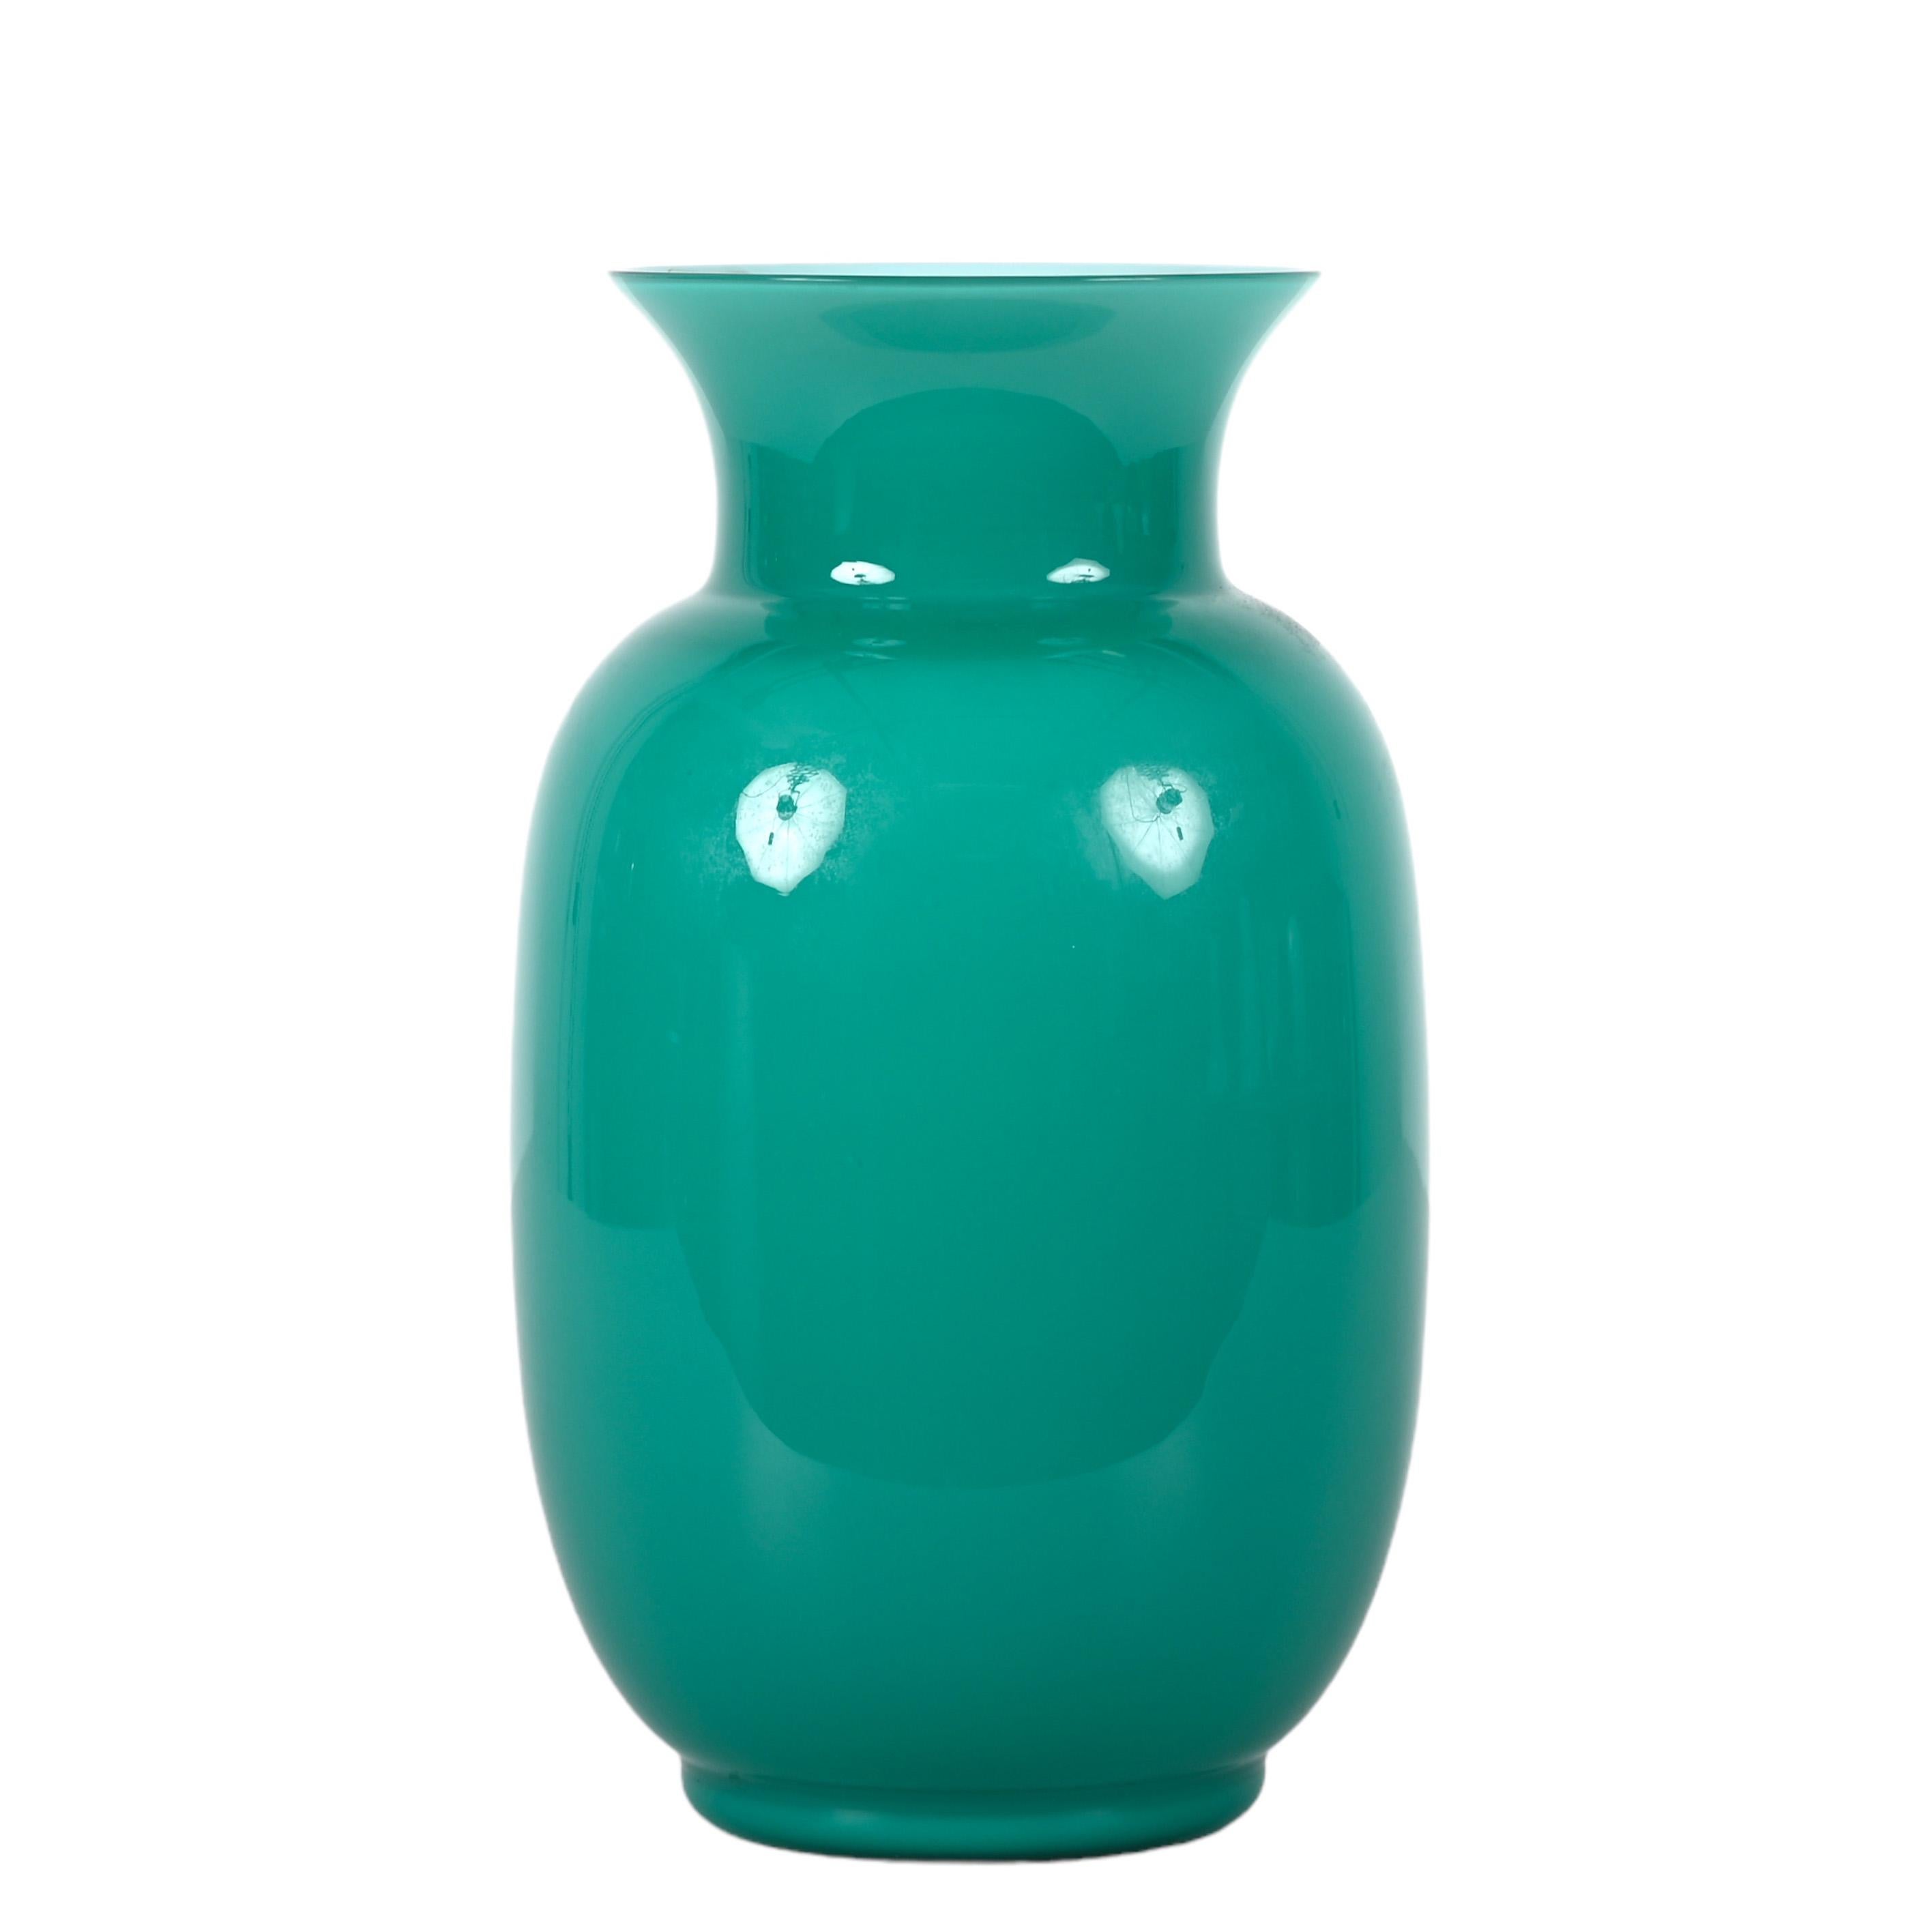 Amazing midcentury turquoise blue Murano glass vase. VeArt, the acronym for Venini Arte, produced this astonishing piece in Italy for Venini during the 1970s.

The mix of delicate white in the internal part, combined with a marvellous turquoise on